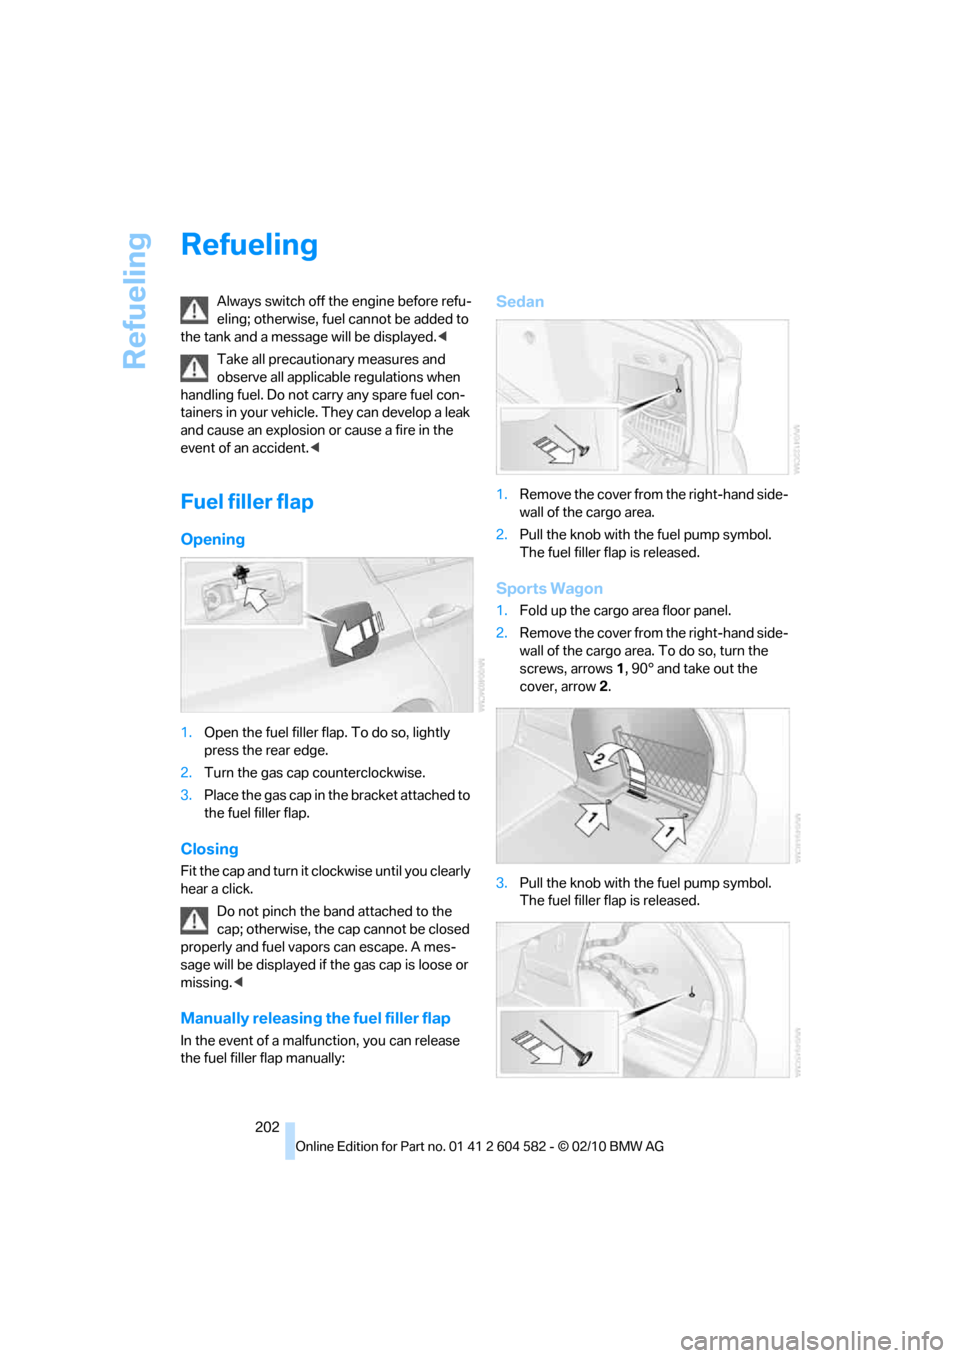 BMW 328I 2011 E90 Owners Manual Refueling
202
Refueling
Always switch off the engine before refu-
eling; otherwise, fuel cannot be added to 
the tank and a message will be displayed.<
Take all precautionary measures and 
observe all